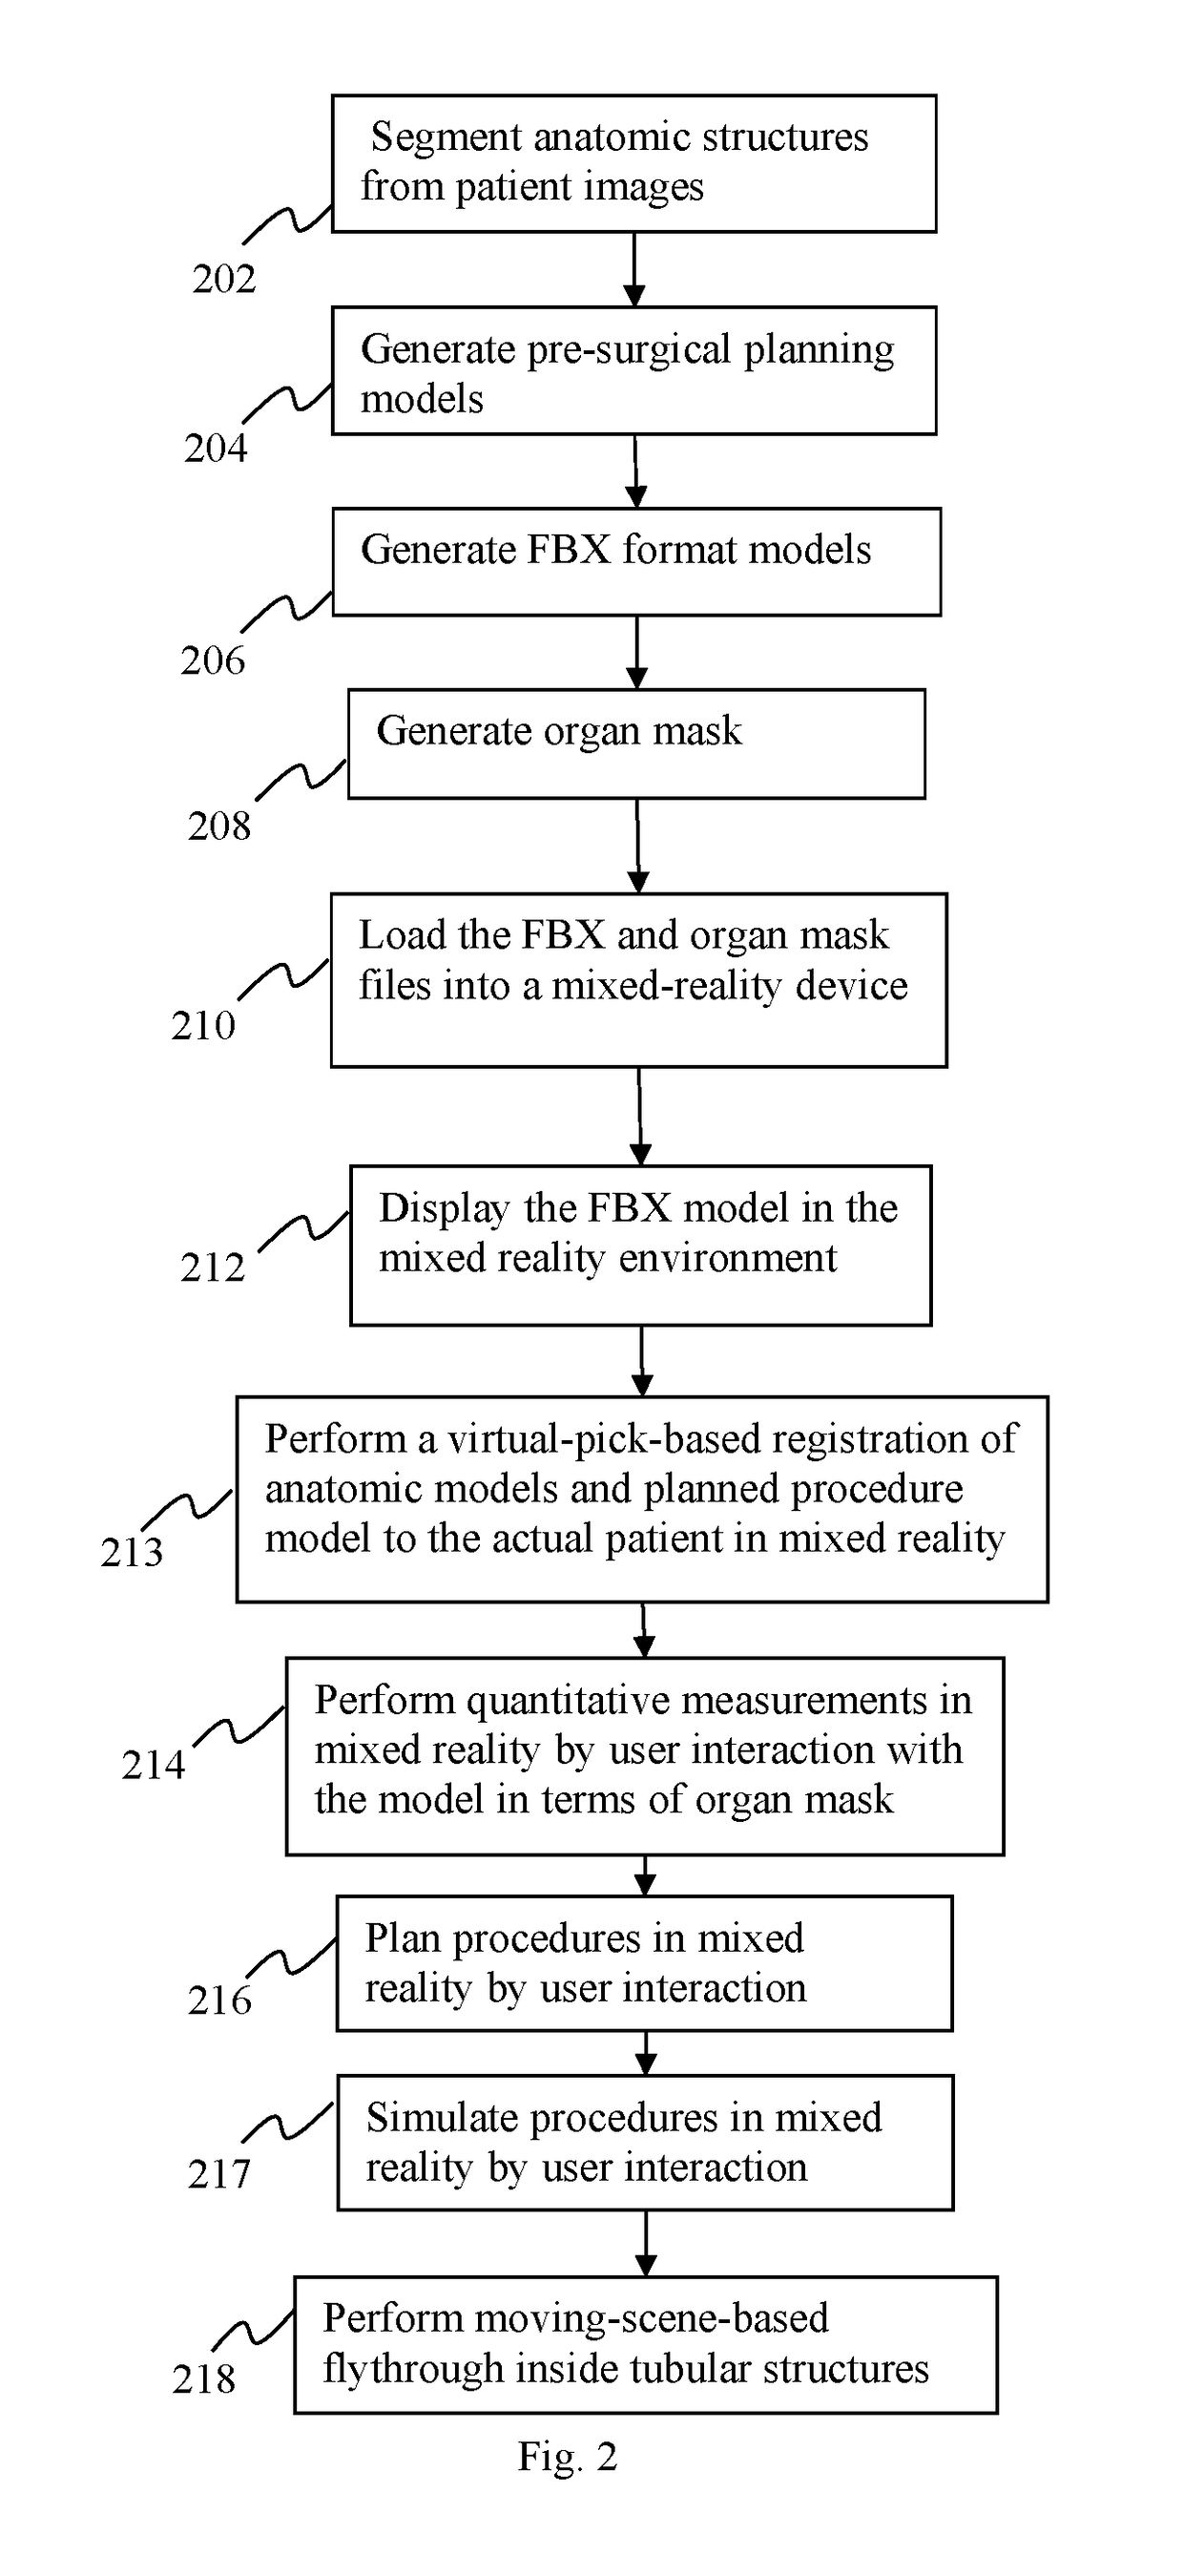 Method and system for surgical planning in a mixed reality environment